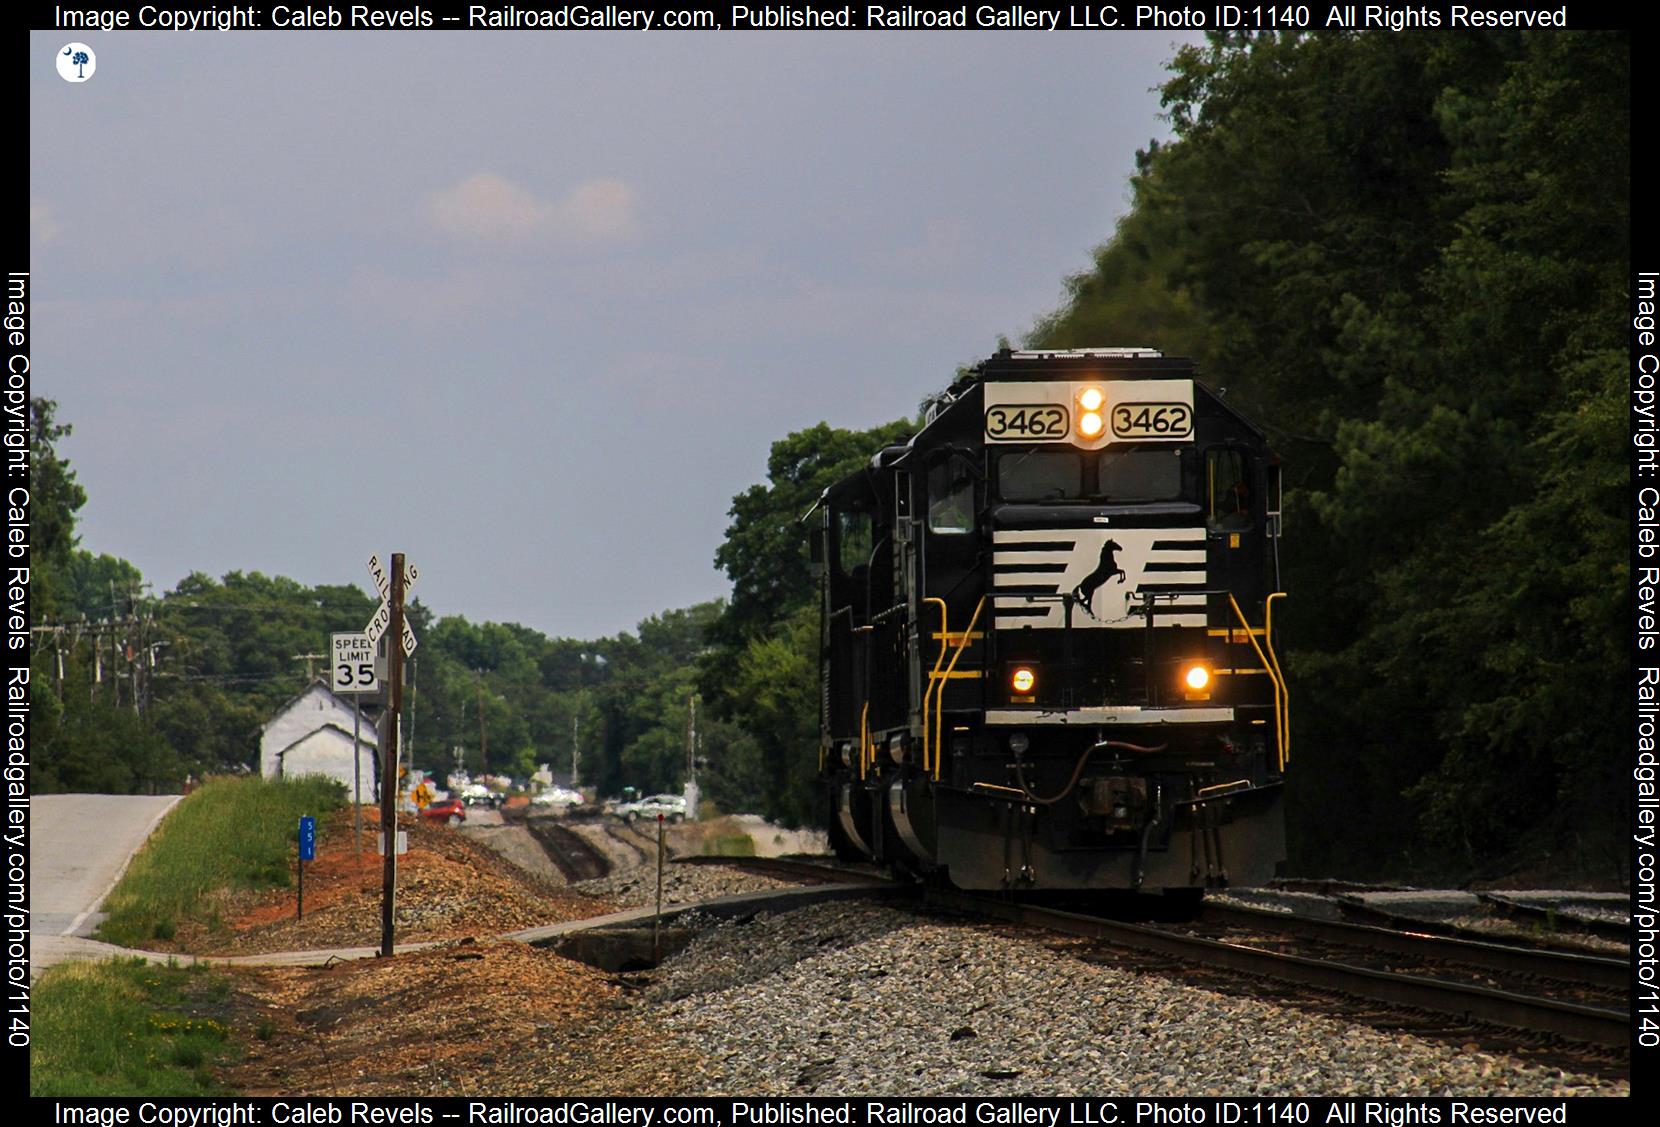 NS 3462 is a class EMD SD40-2 and  is pictured in Pacolet , South Carolina, USA.  This was taken along the Norfolk Southern W Line  on the Norfolk Southern. Photo Copyright: Caleb Revels uploaded to Railroad Gallery on 06/14/2023. This photograph of NS 3462 was taken on Tuesday, June 13, 2023. All Rights Reserved. 